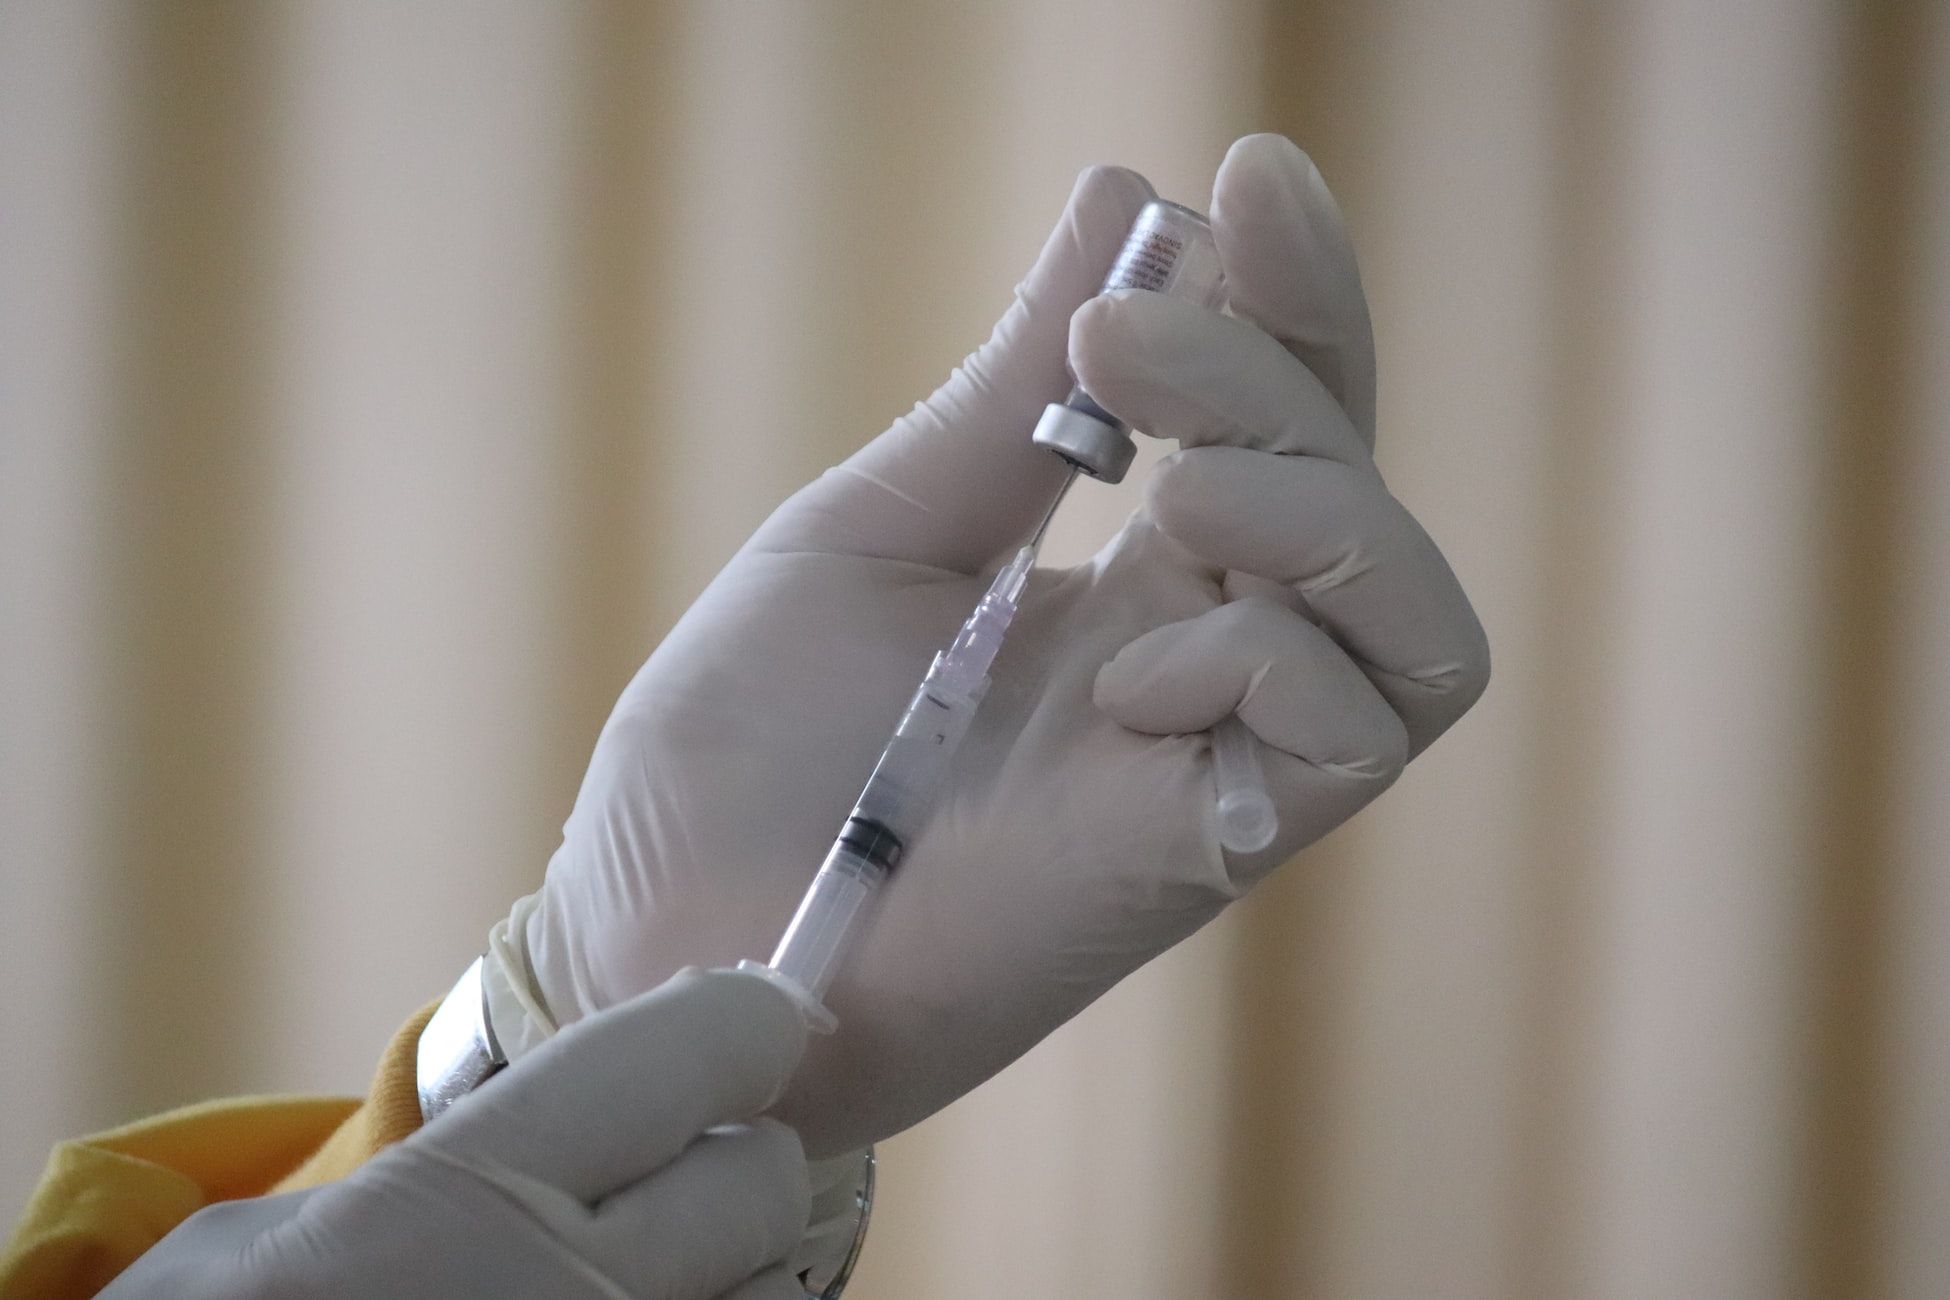 Fully-vaccinated Americans do not need a booster dose for now: FDA